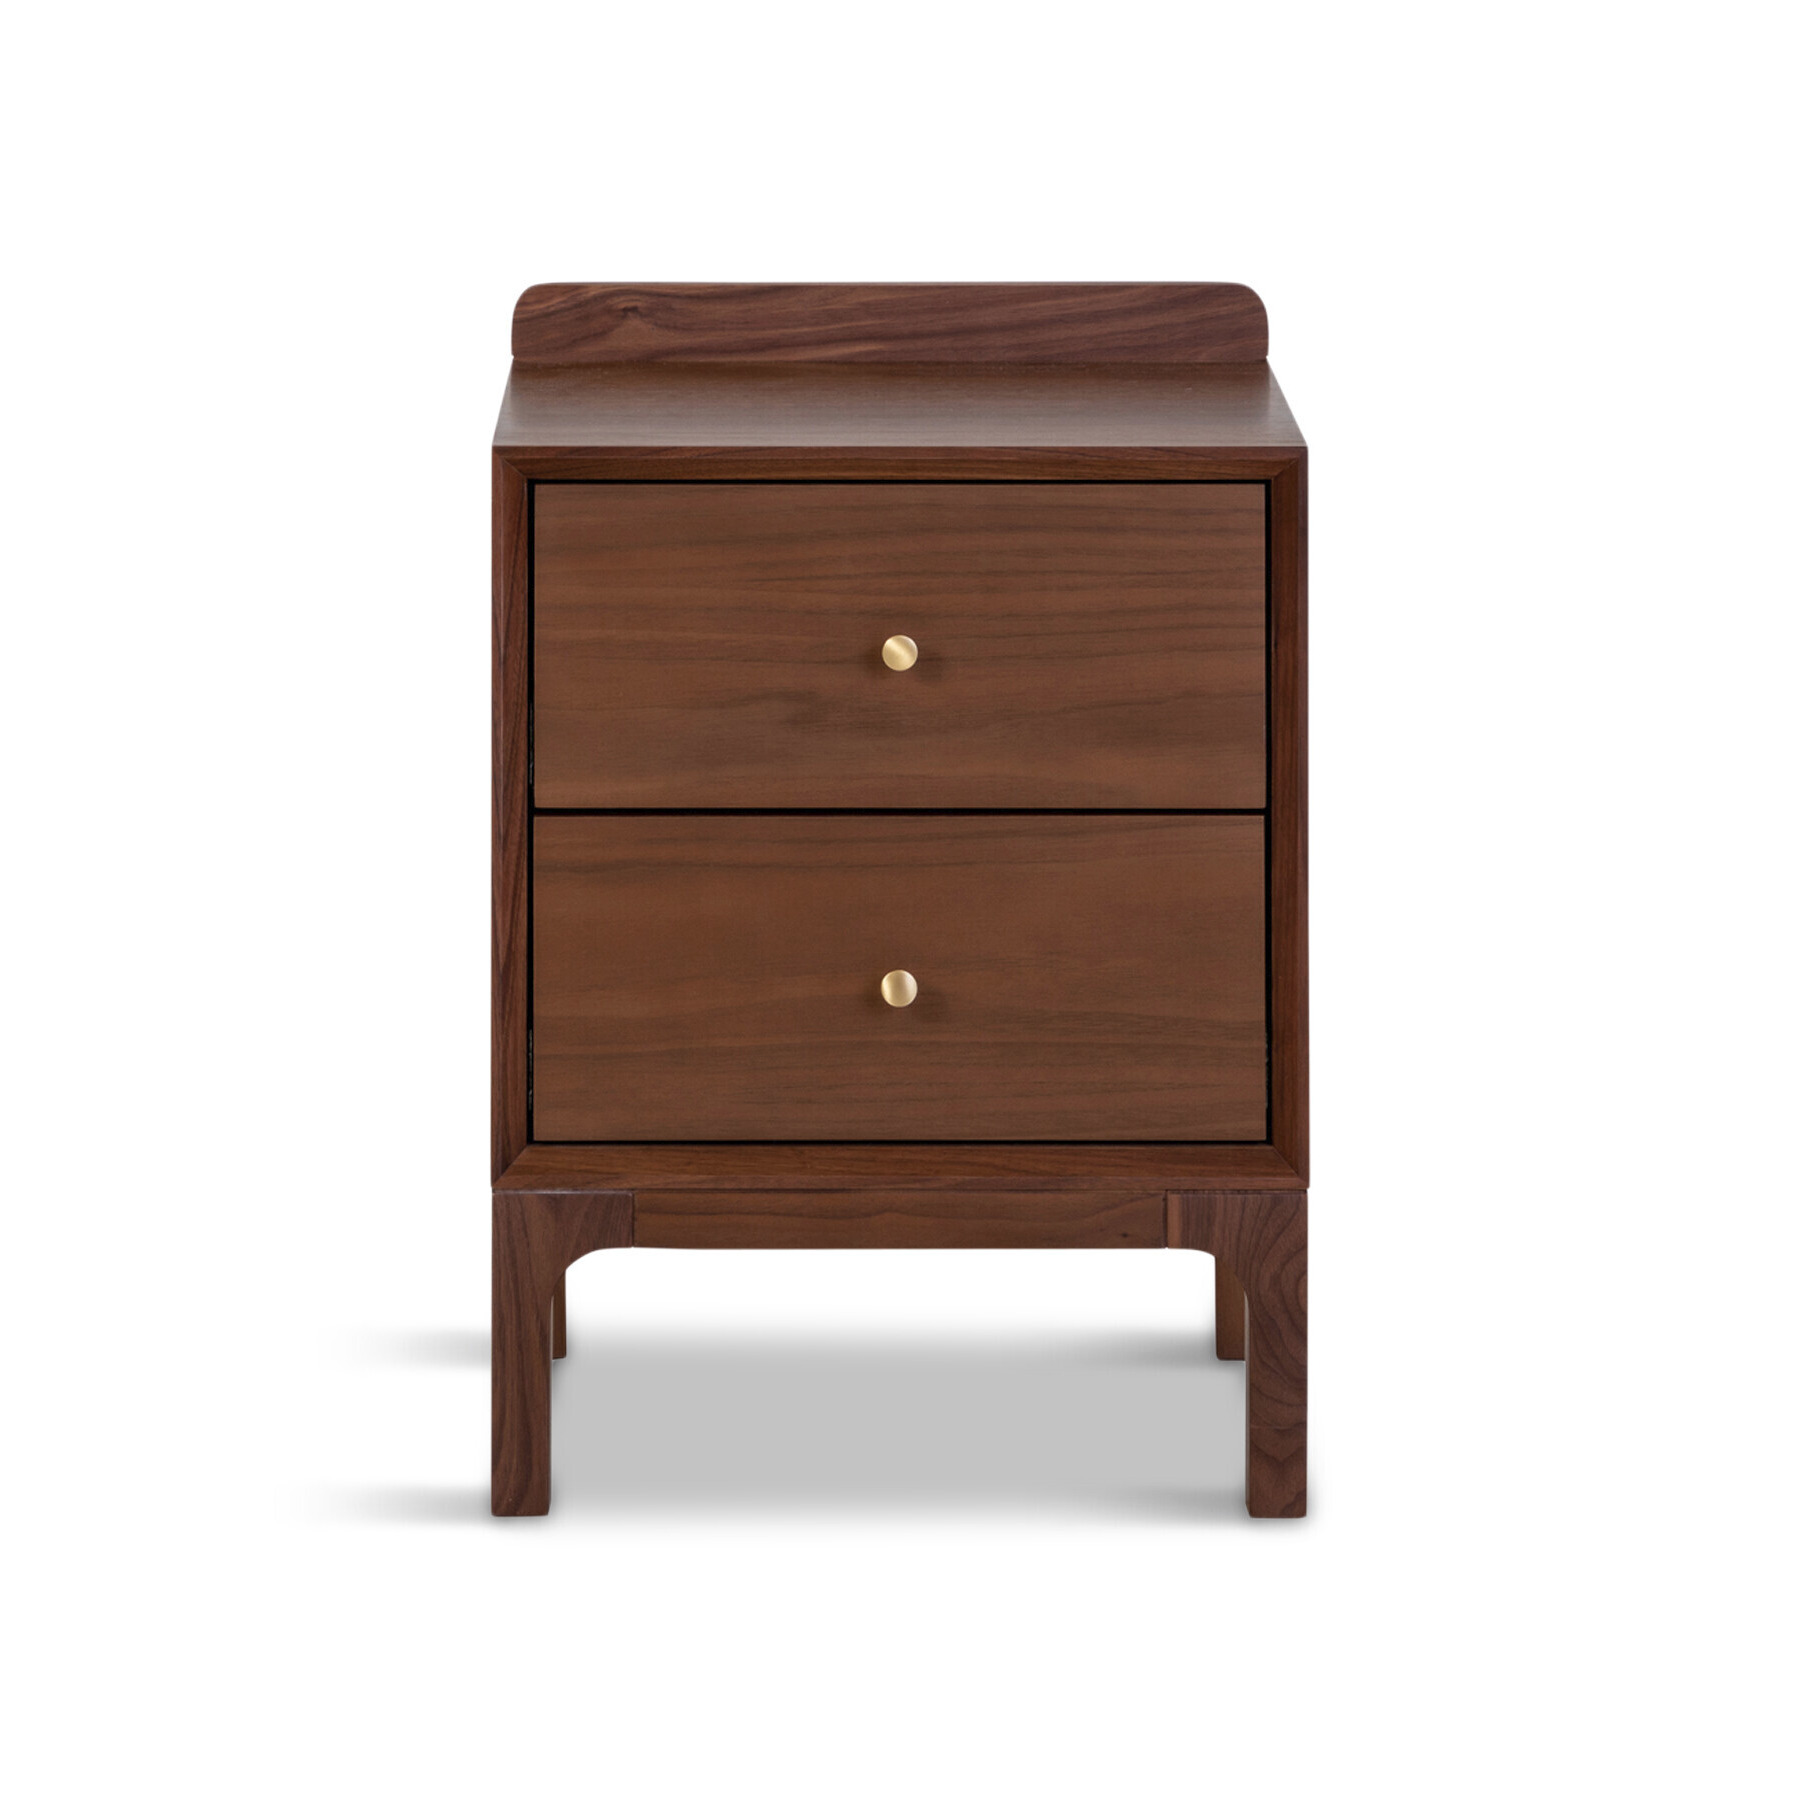 Heal's Artie Bedside Table - Size 40x35x56 Brown